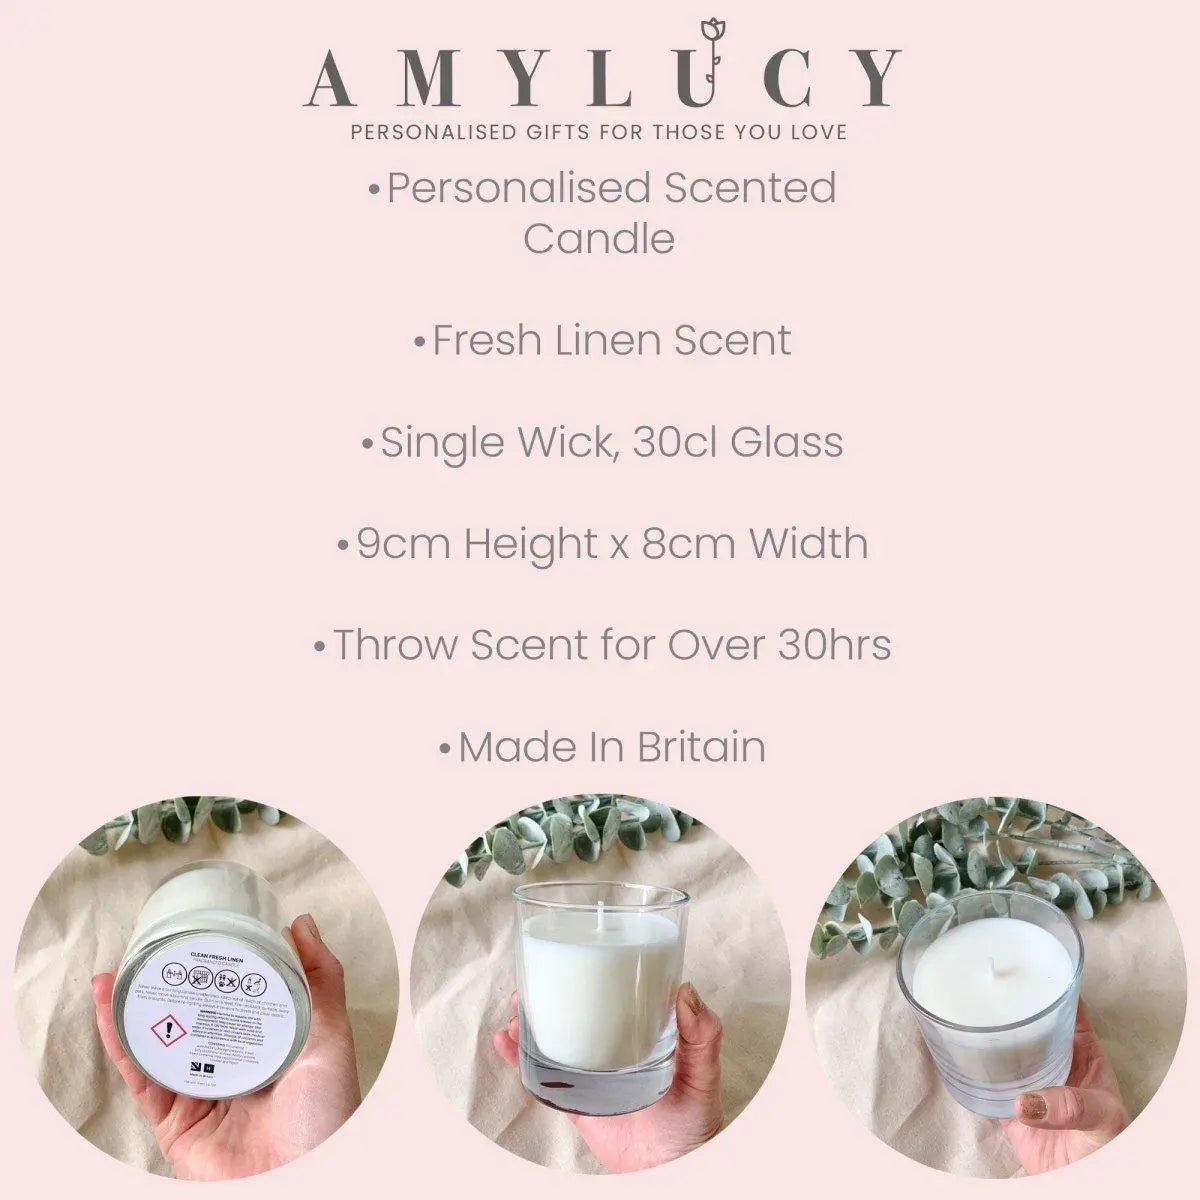 Personalised Name Meaning Candle, Custom Name Candle, Scented Candle, Any Name Personalised Candle, Birthday Candle, Candles, For Her, - Amy Lucy